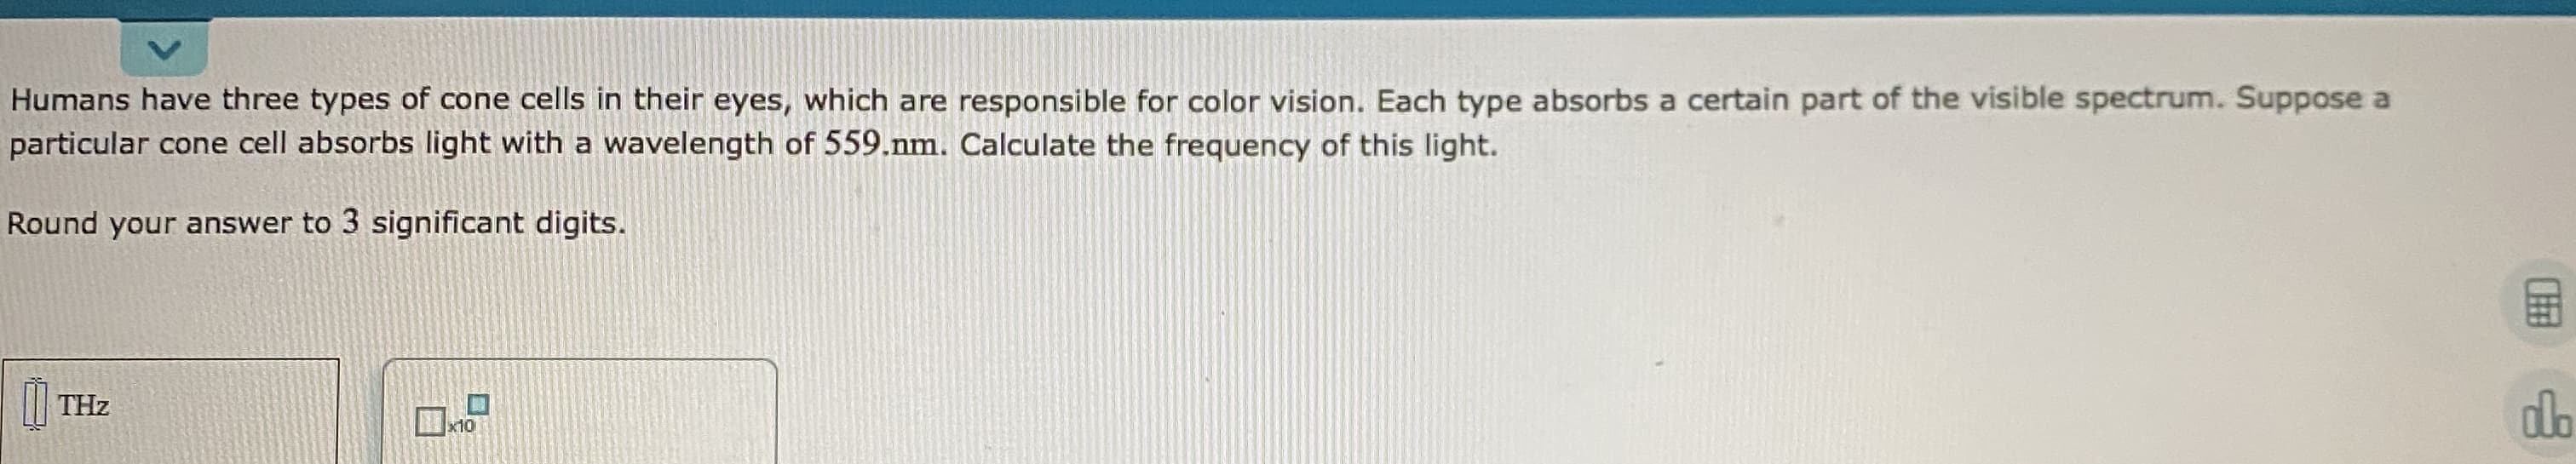 Humans have three types of cone cells in their eyes, which are responsible for color vision. Each type absorbs a certain part of the visible spectrum. Suppose a
particular cone cell absorbs light with a wavelength of 559.nm. Calculate the frequency of this light.
Round your answer to 3 significant digits.
THz
x10
